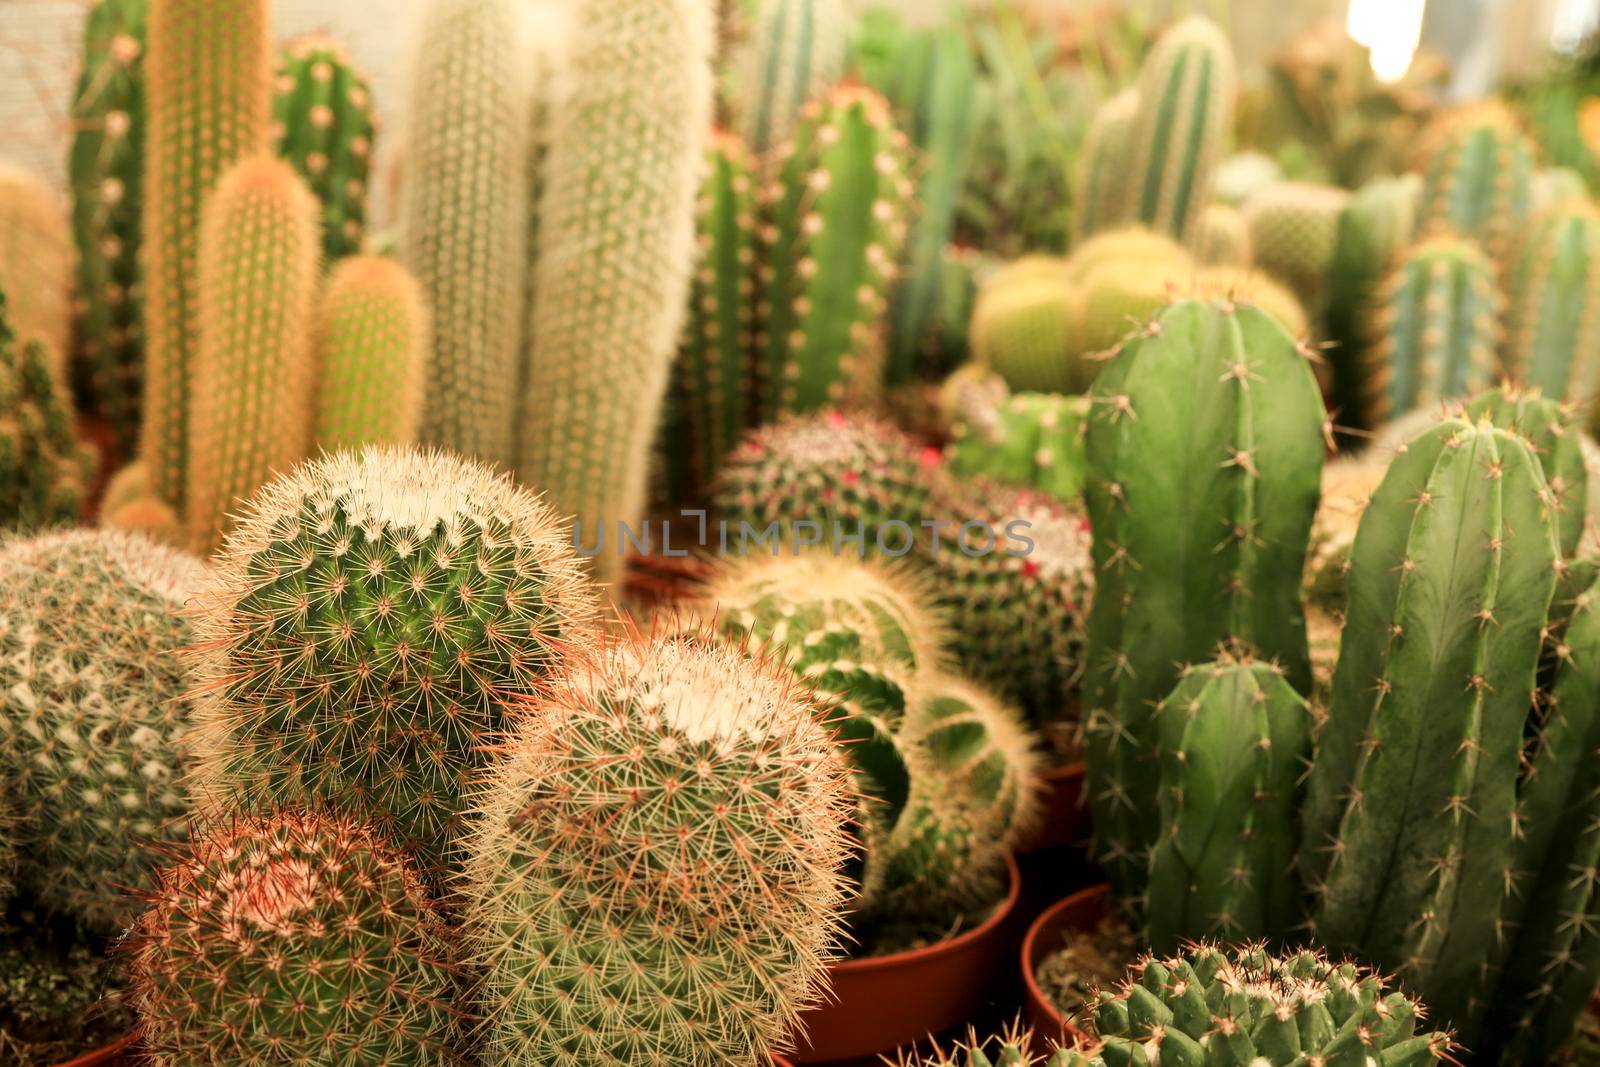 Pots of different kind of cactus for sale by soniabonet